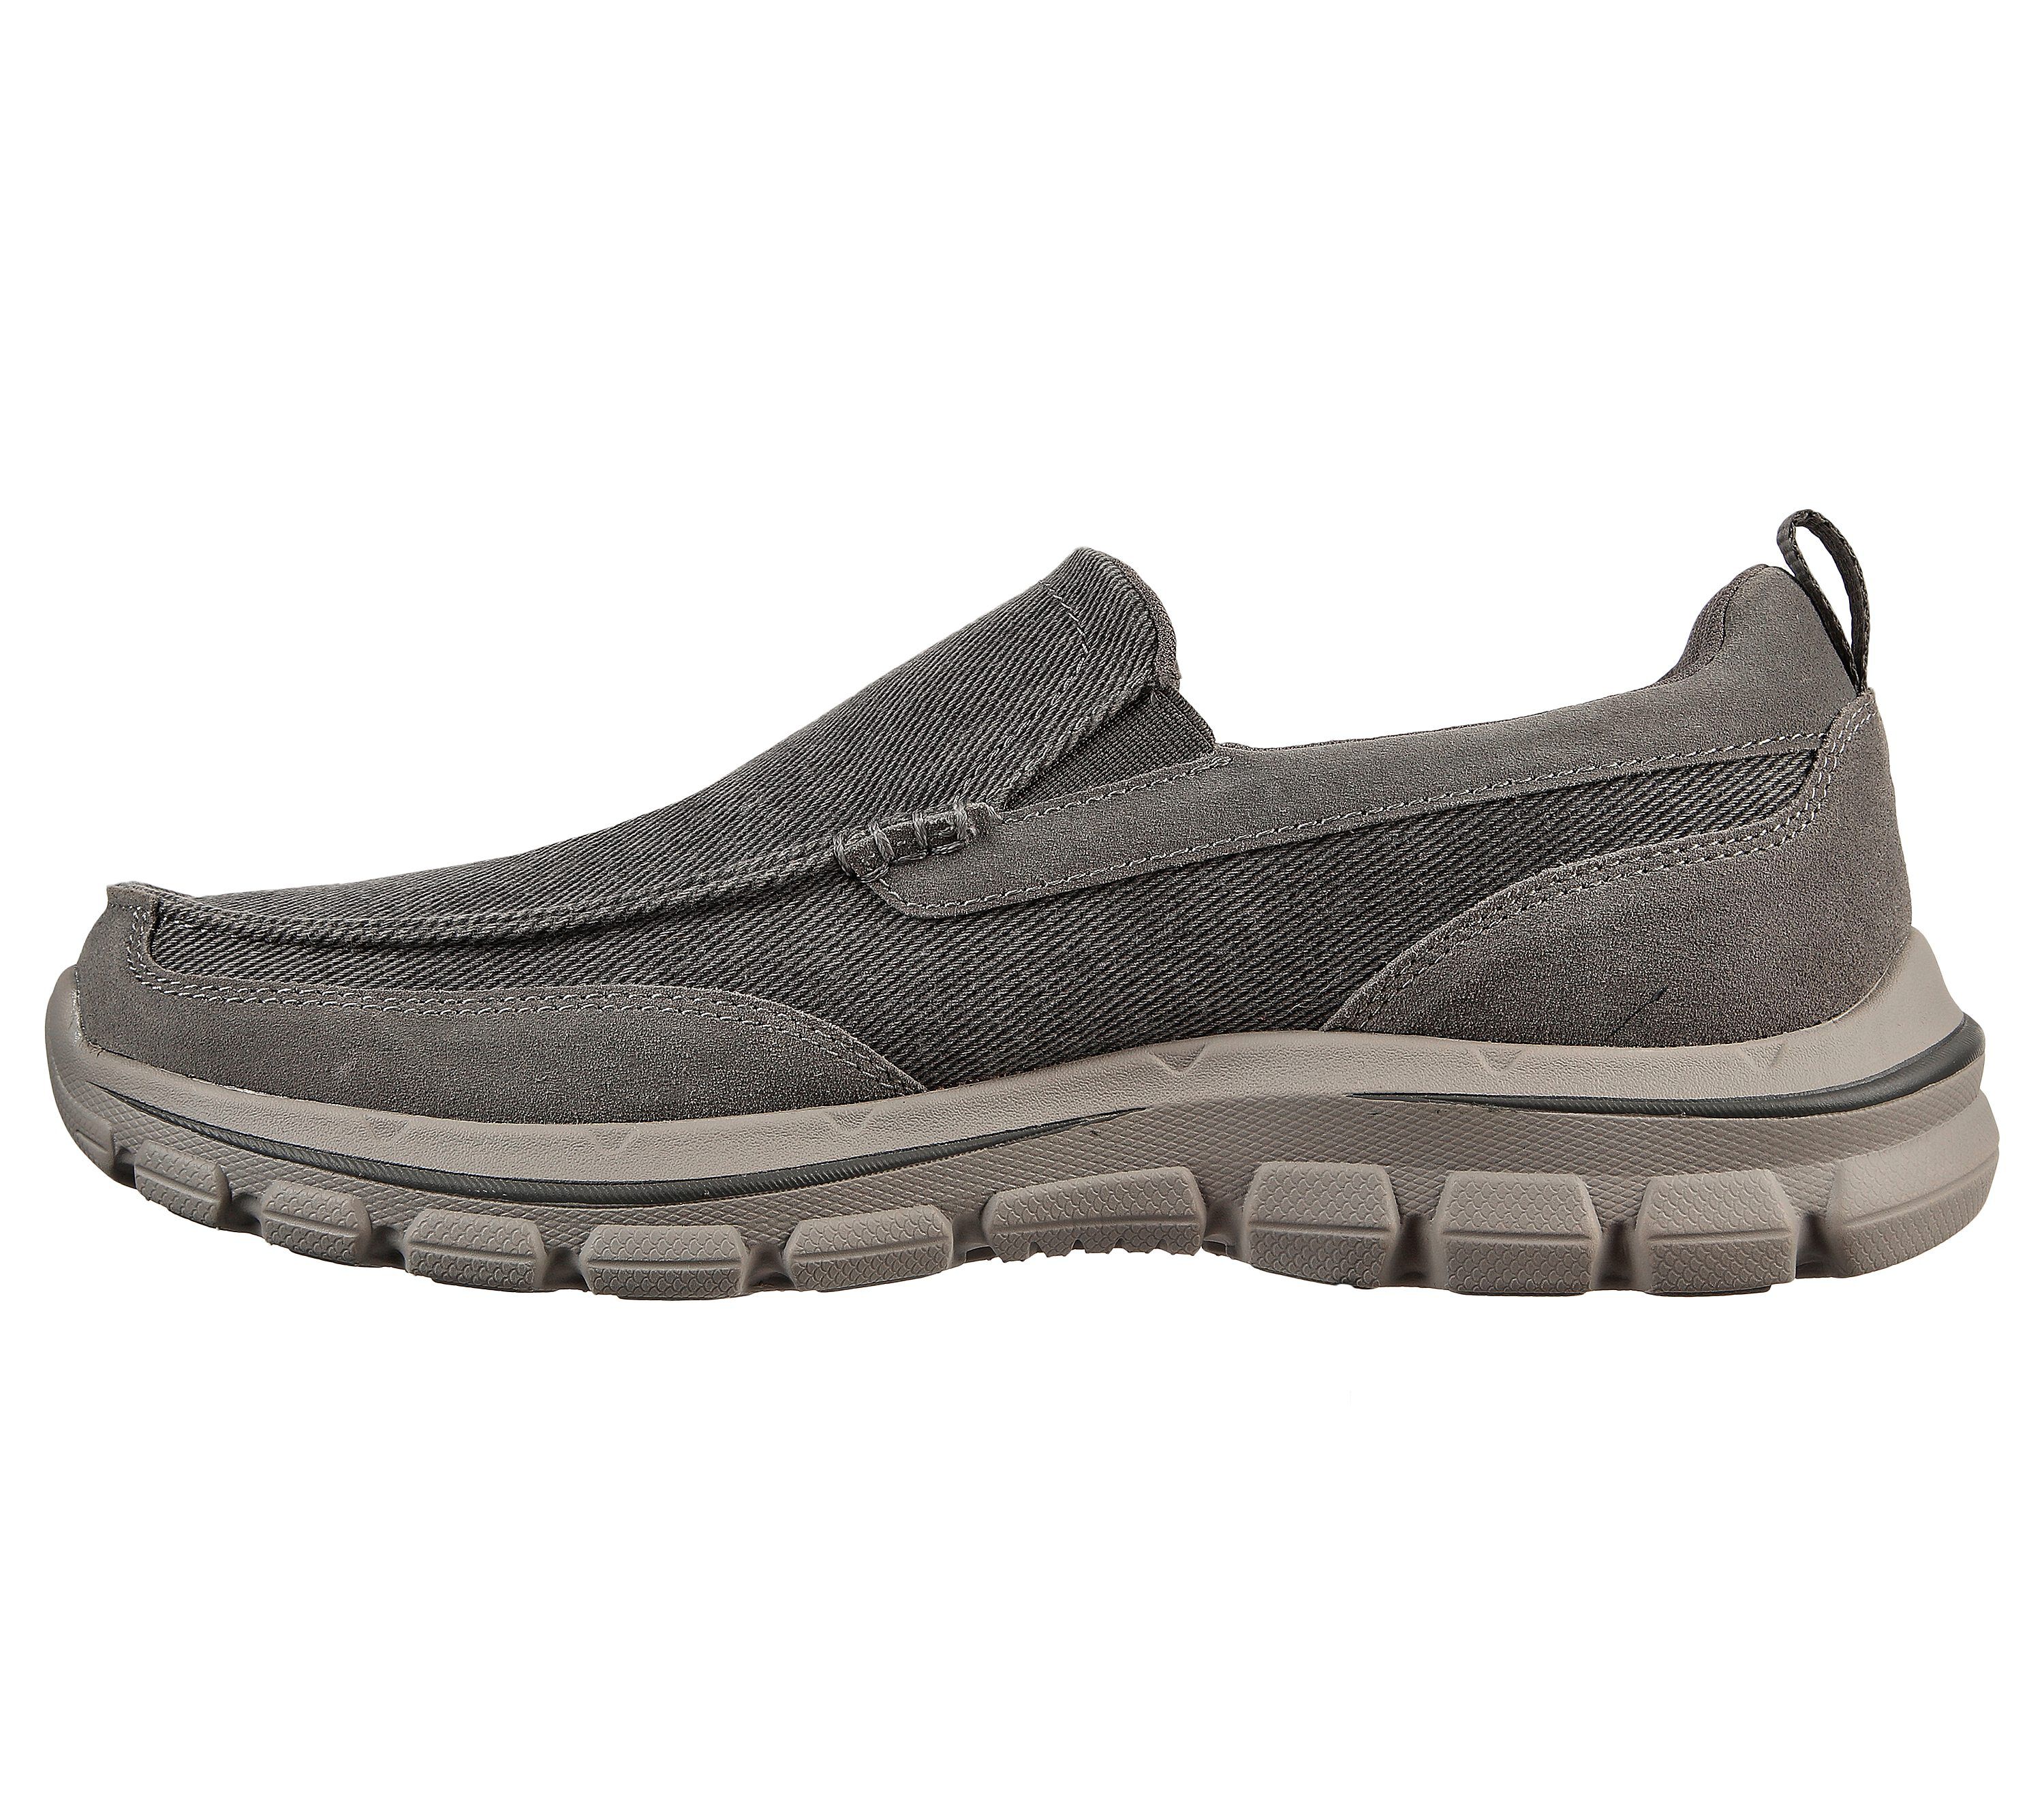 Skechers Relaxed Fit: Palmero - Matthis | Mall of America®